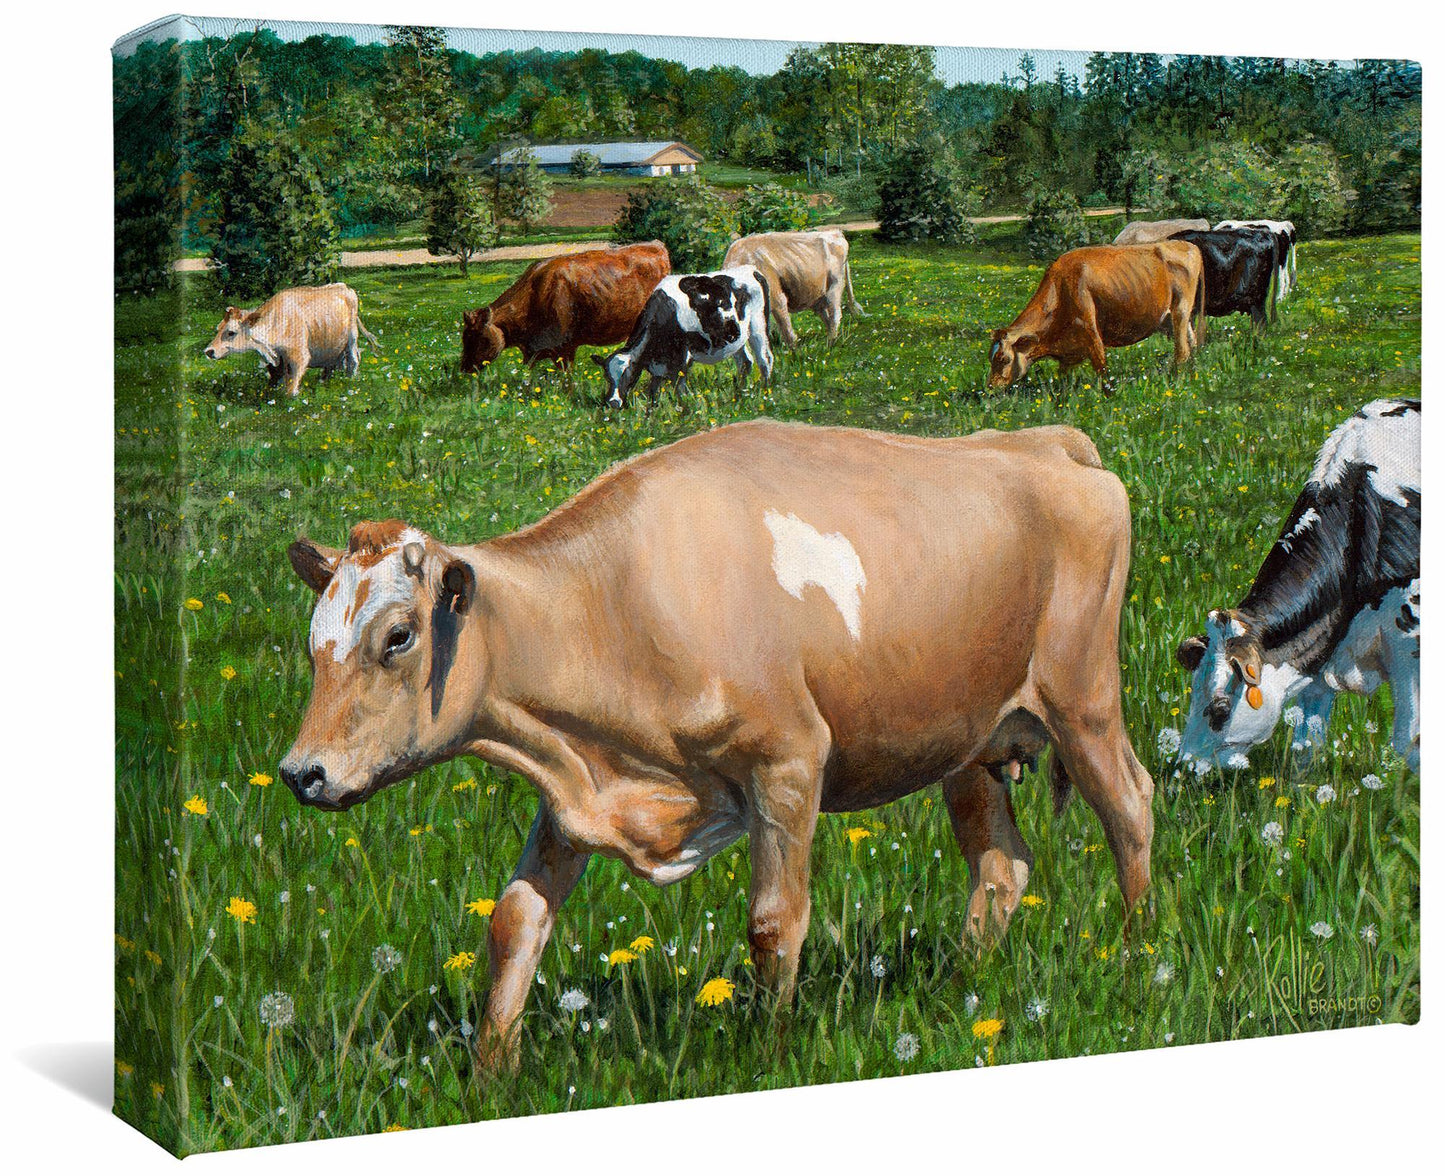 Girls of Summer—Cows Gallery Wrapped Canvas - Wild Wings